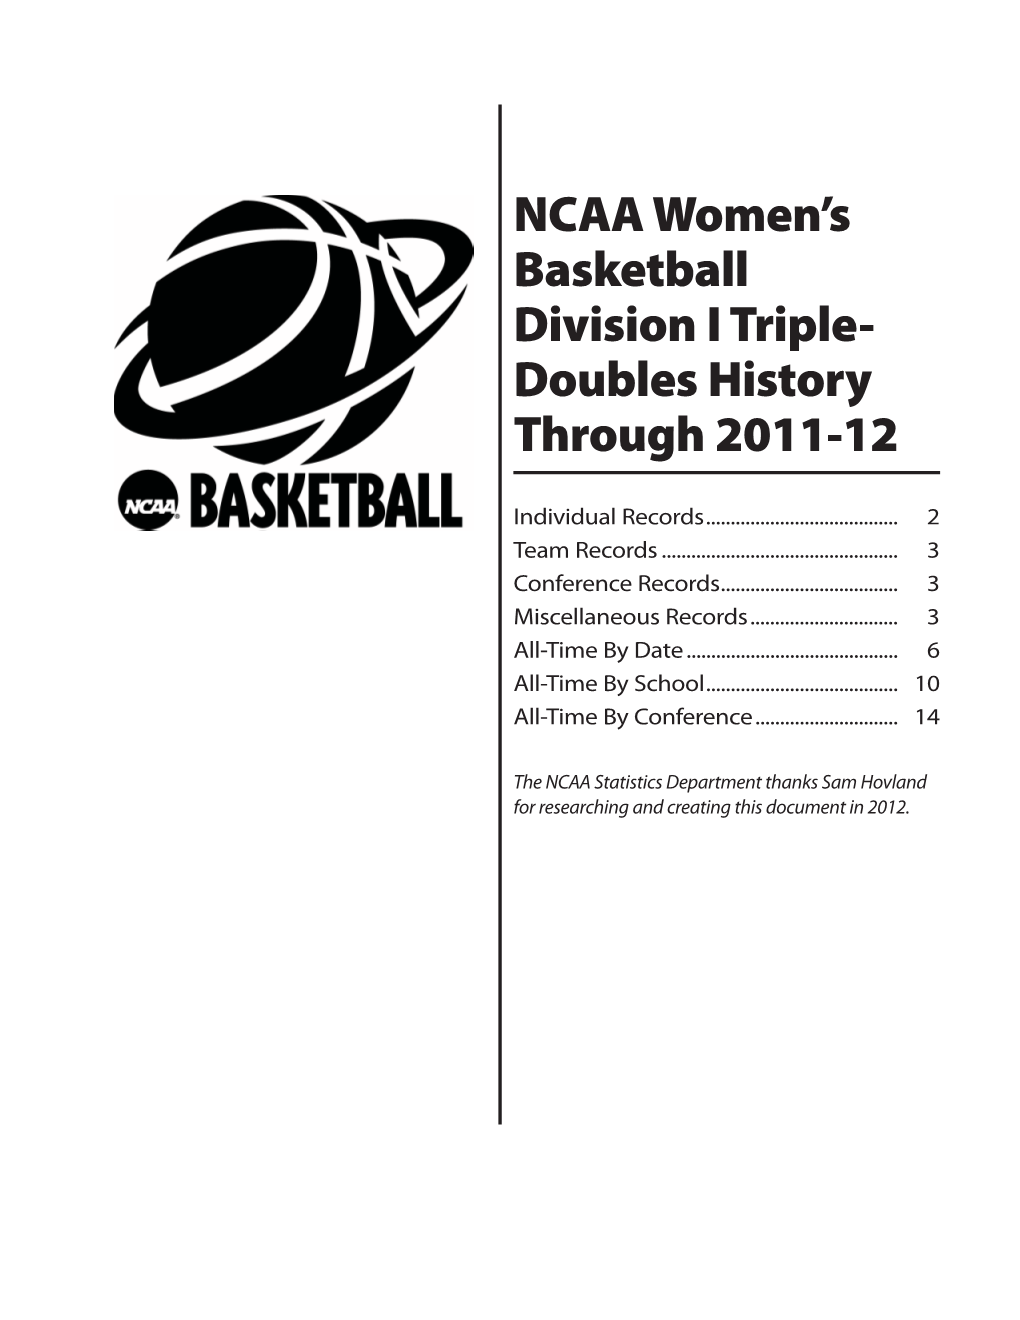 DIVISION I TRIPLE-DOUBLES HISTORY THROUGH 2011-12 Triple-Double Records